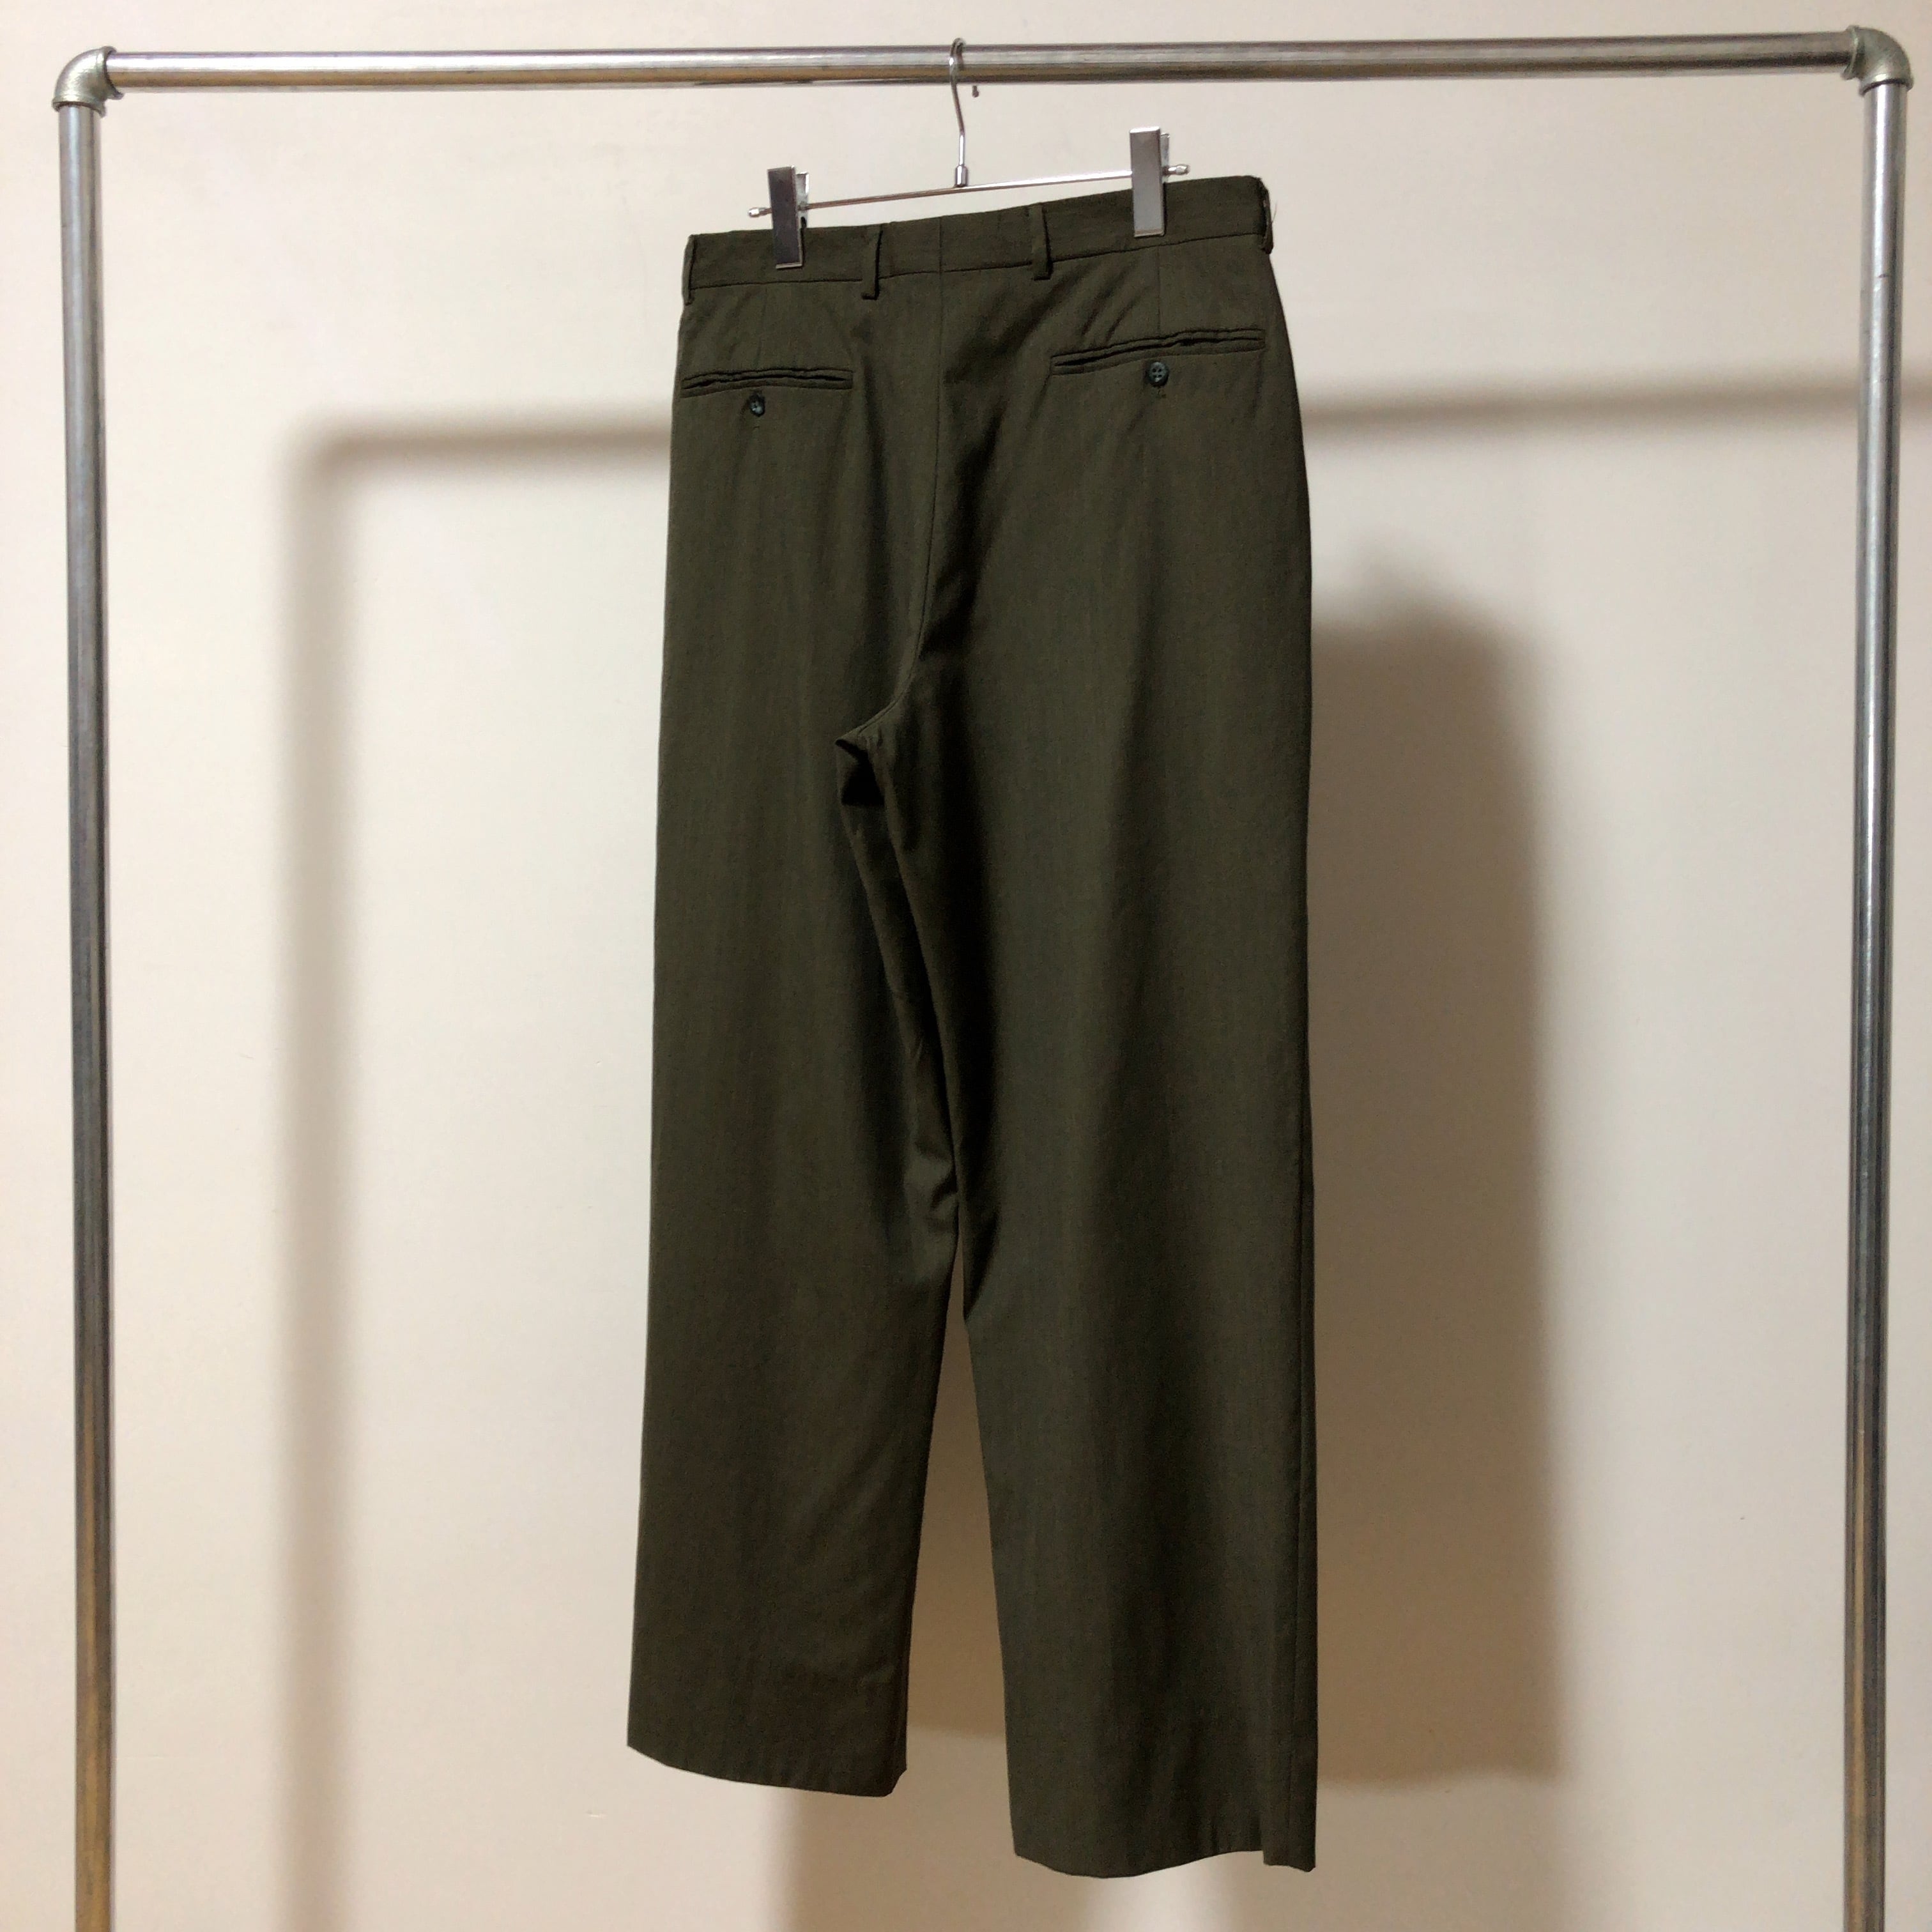 GIORGIO ARMANI / 80's Vintage 2tuck Wool Trousers / Made in Itary